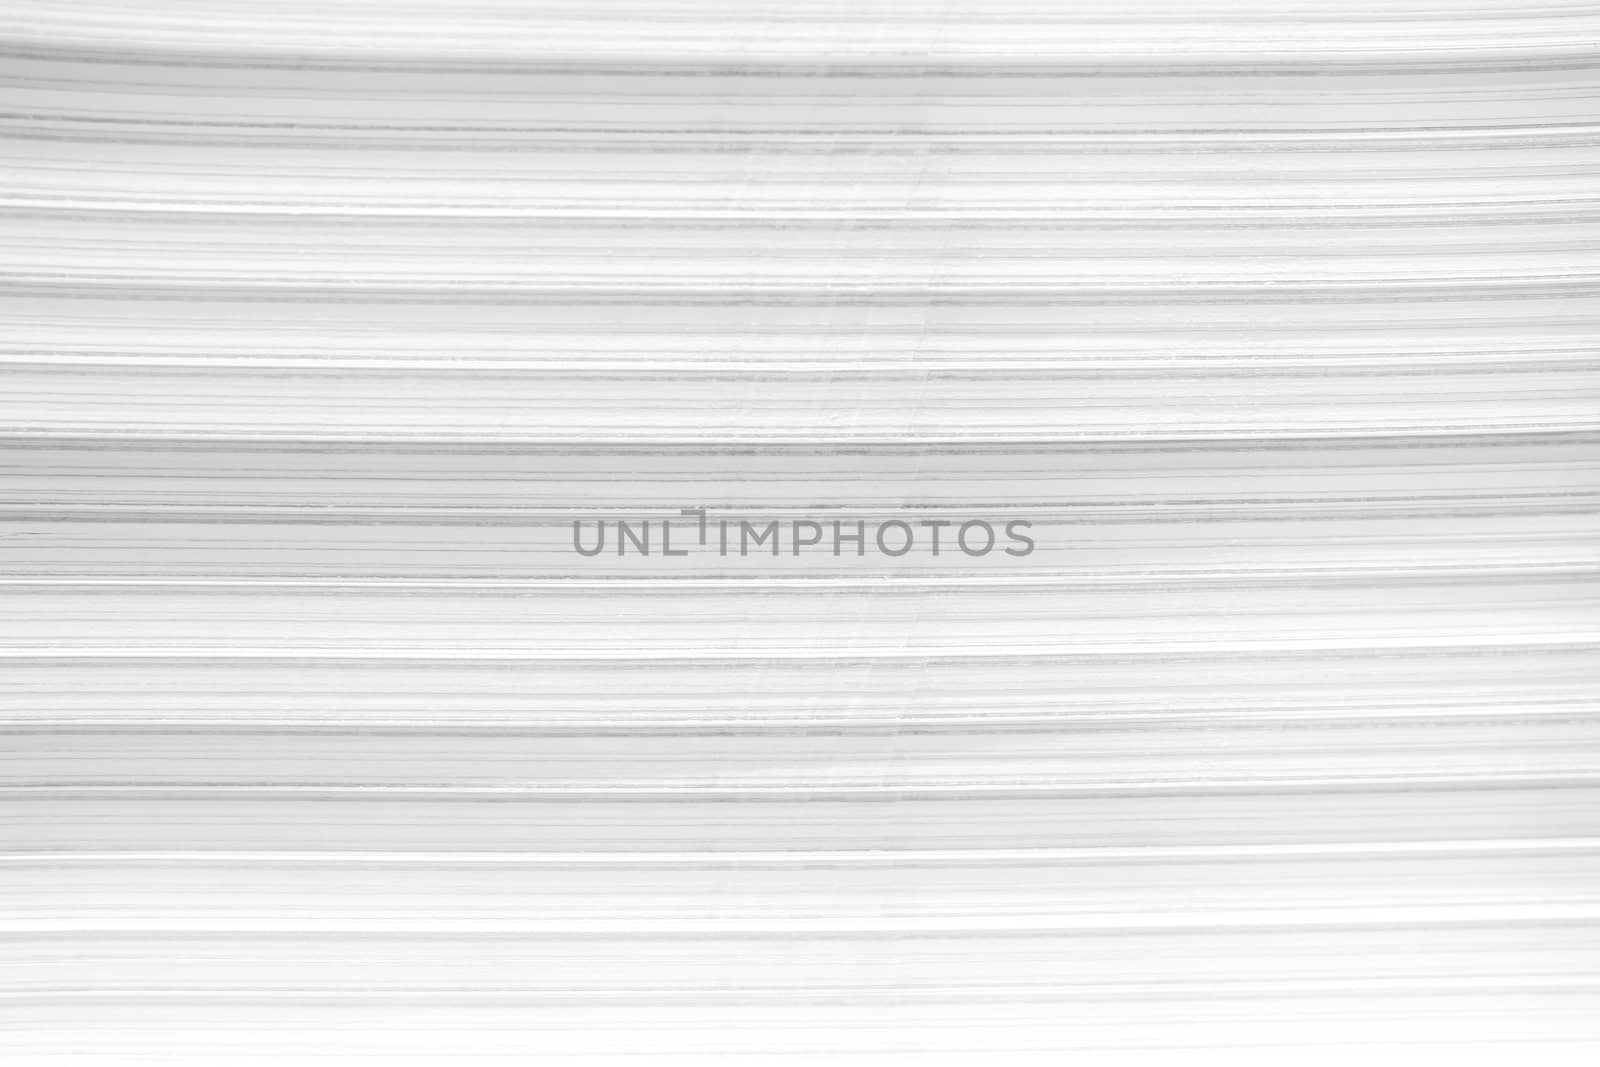 Stack of White Paper Background.